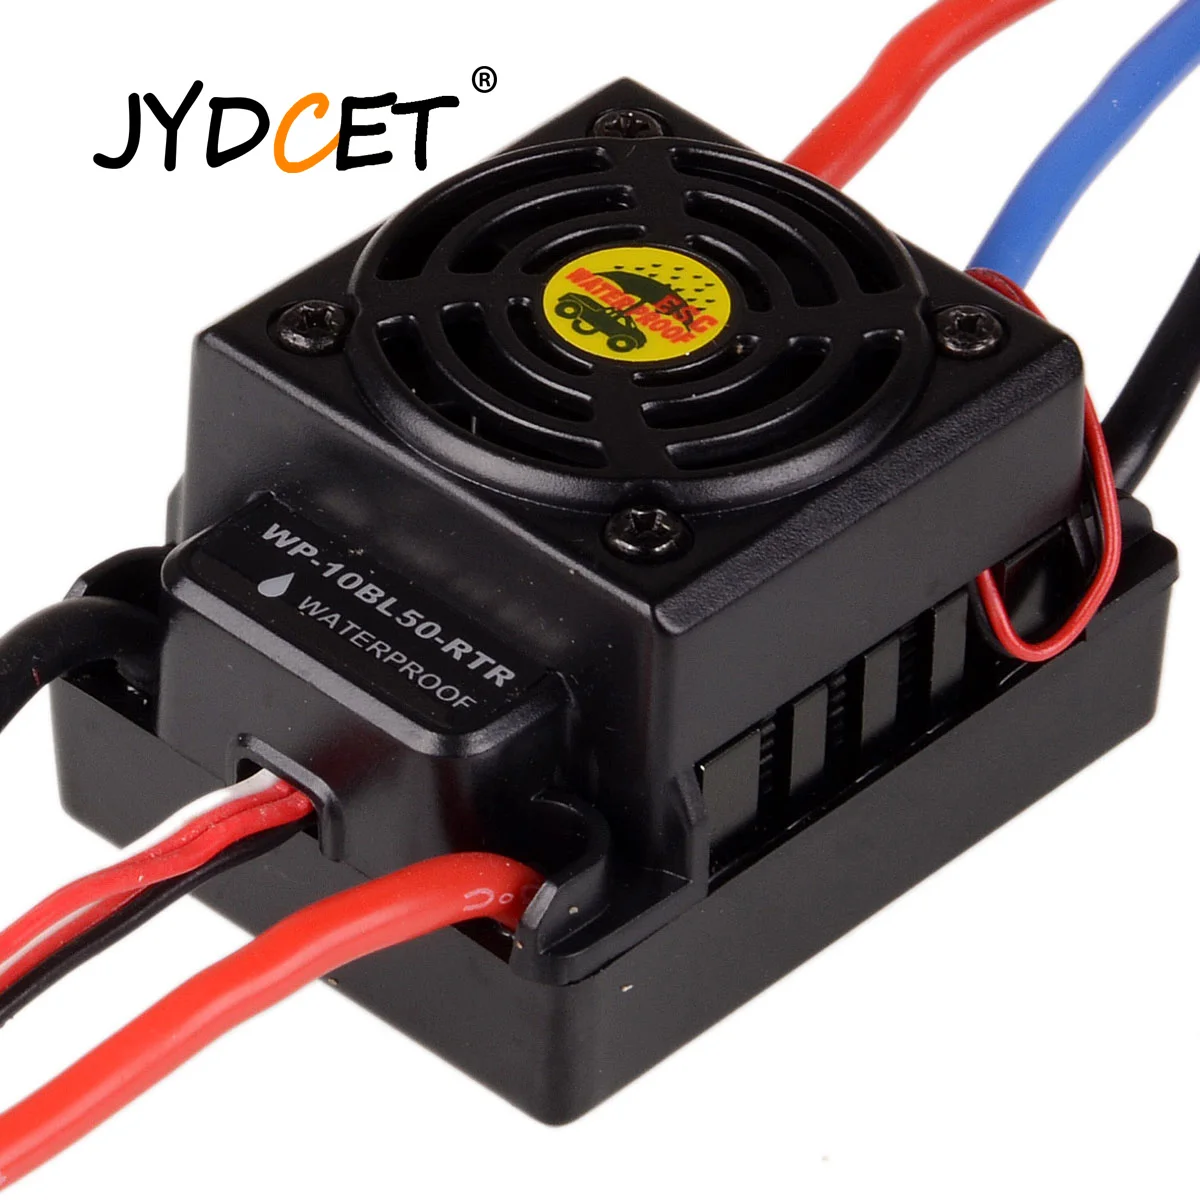 

WP-10BL50-RTR 50A Waterproof ESC 2S 3S SBEC 6V/3A 2-3S Lipo 4-9cells NiMH 2650 Motor For 1/10 Scale Models Remote Control Car